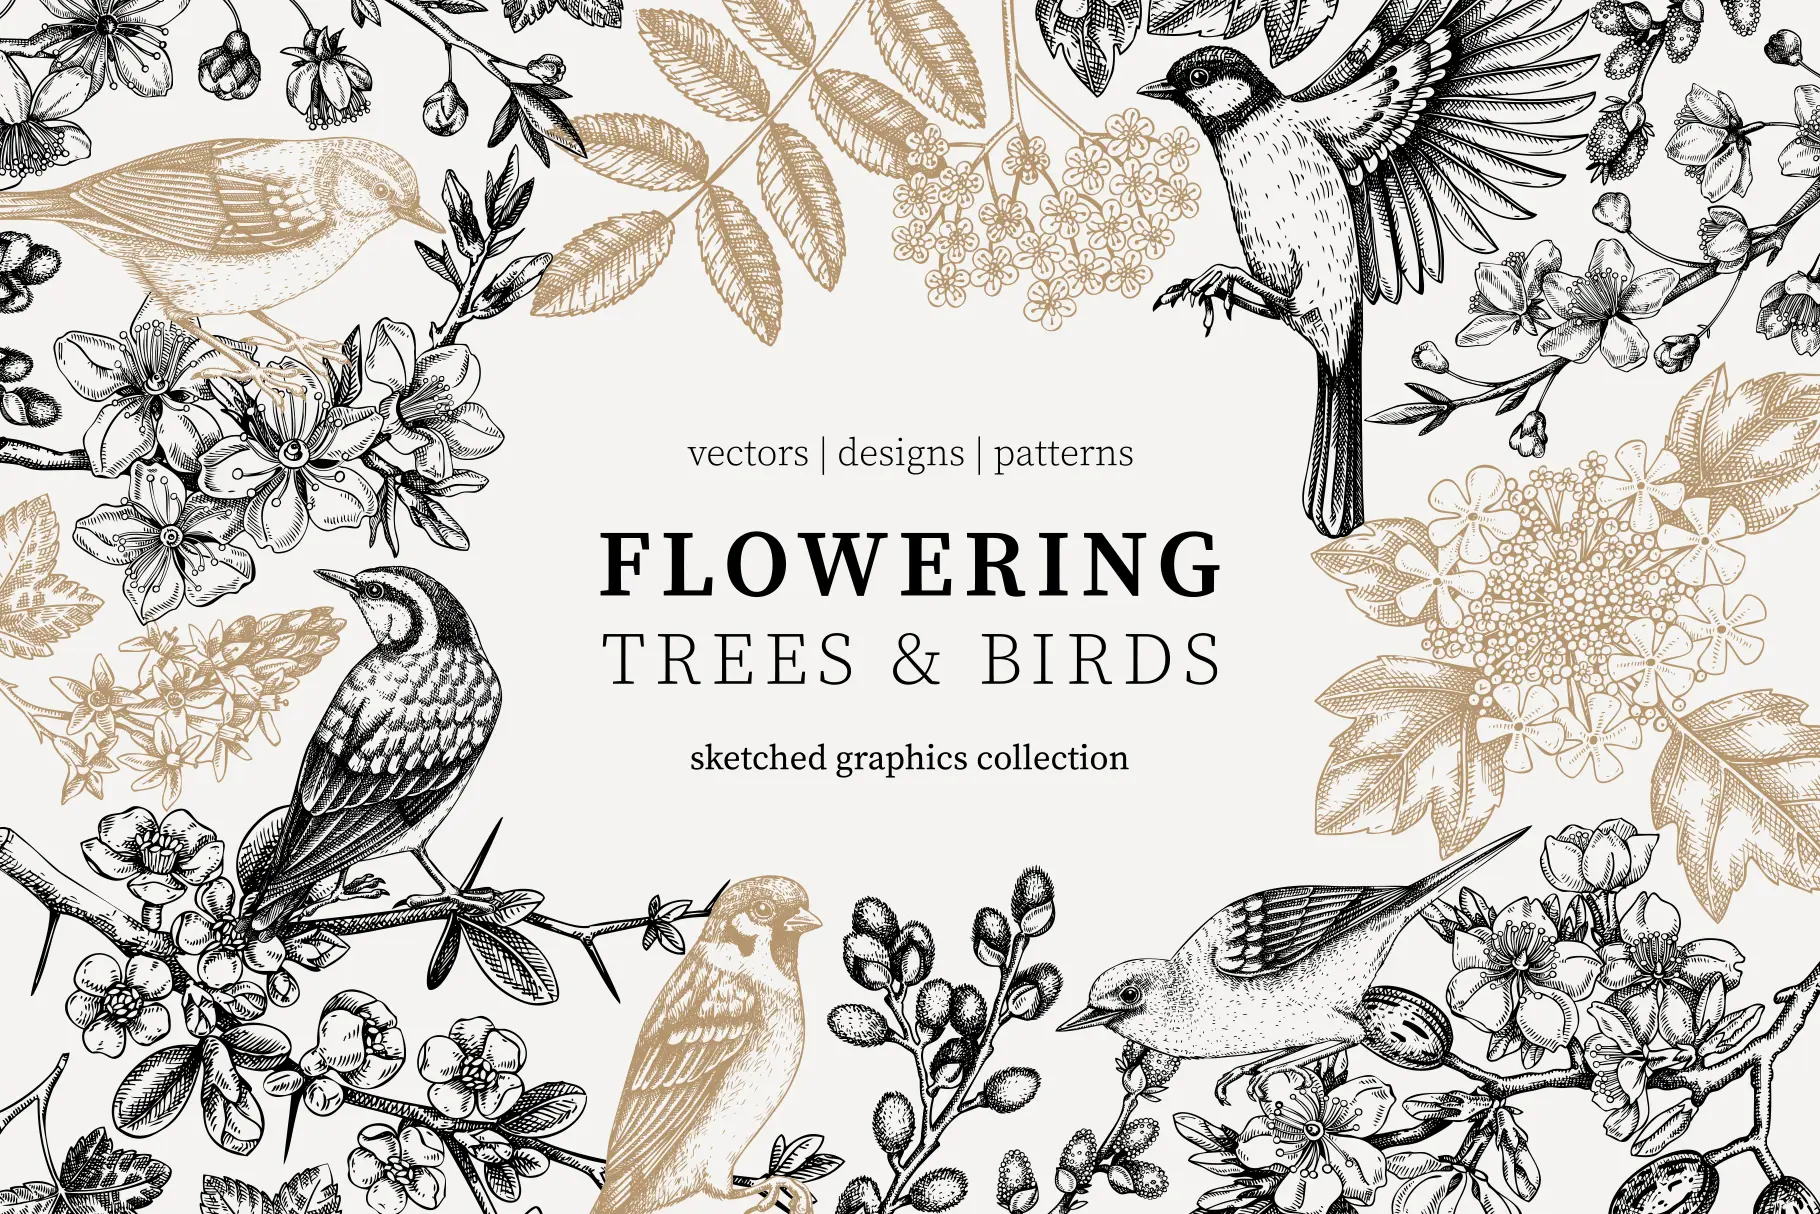 Spring flowers and birds collection. Floral designs. Hand-drawn vector illustrations. Illustration